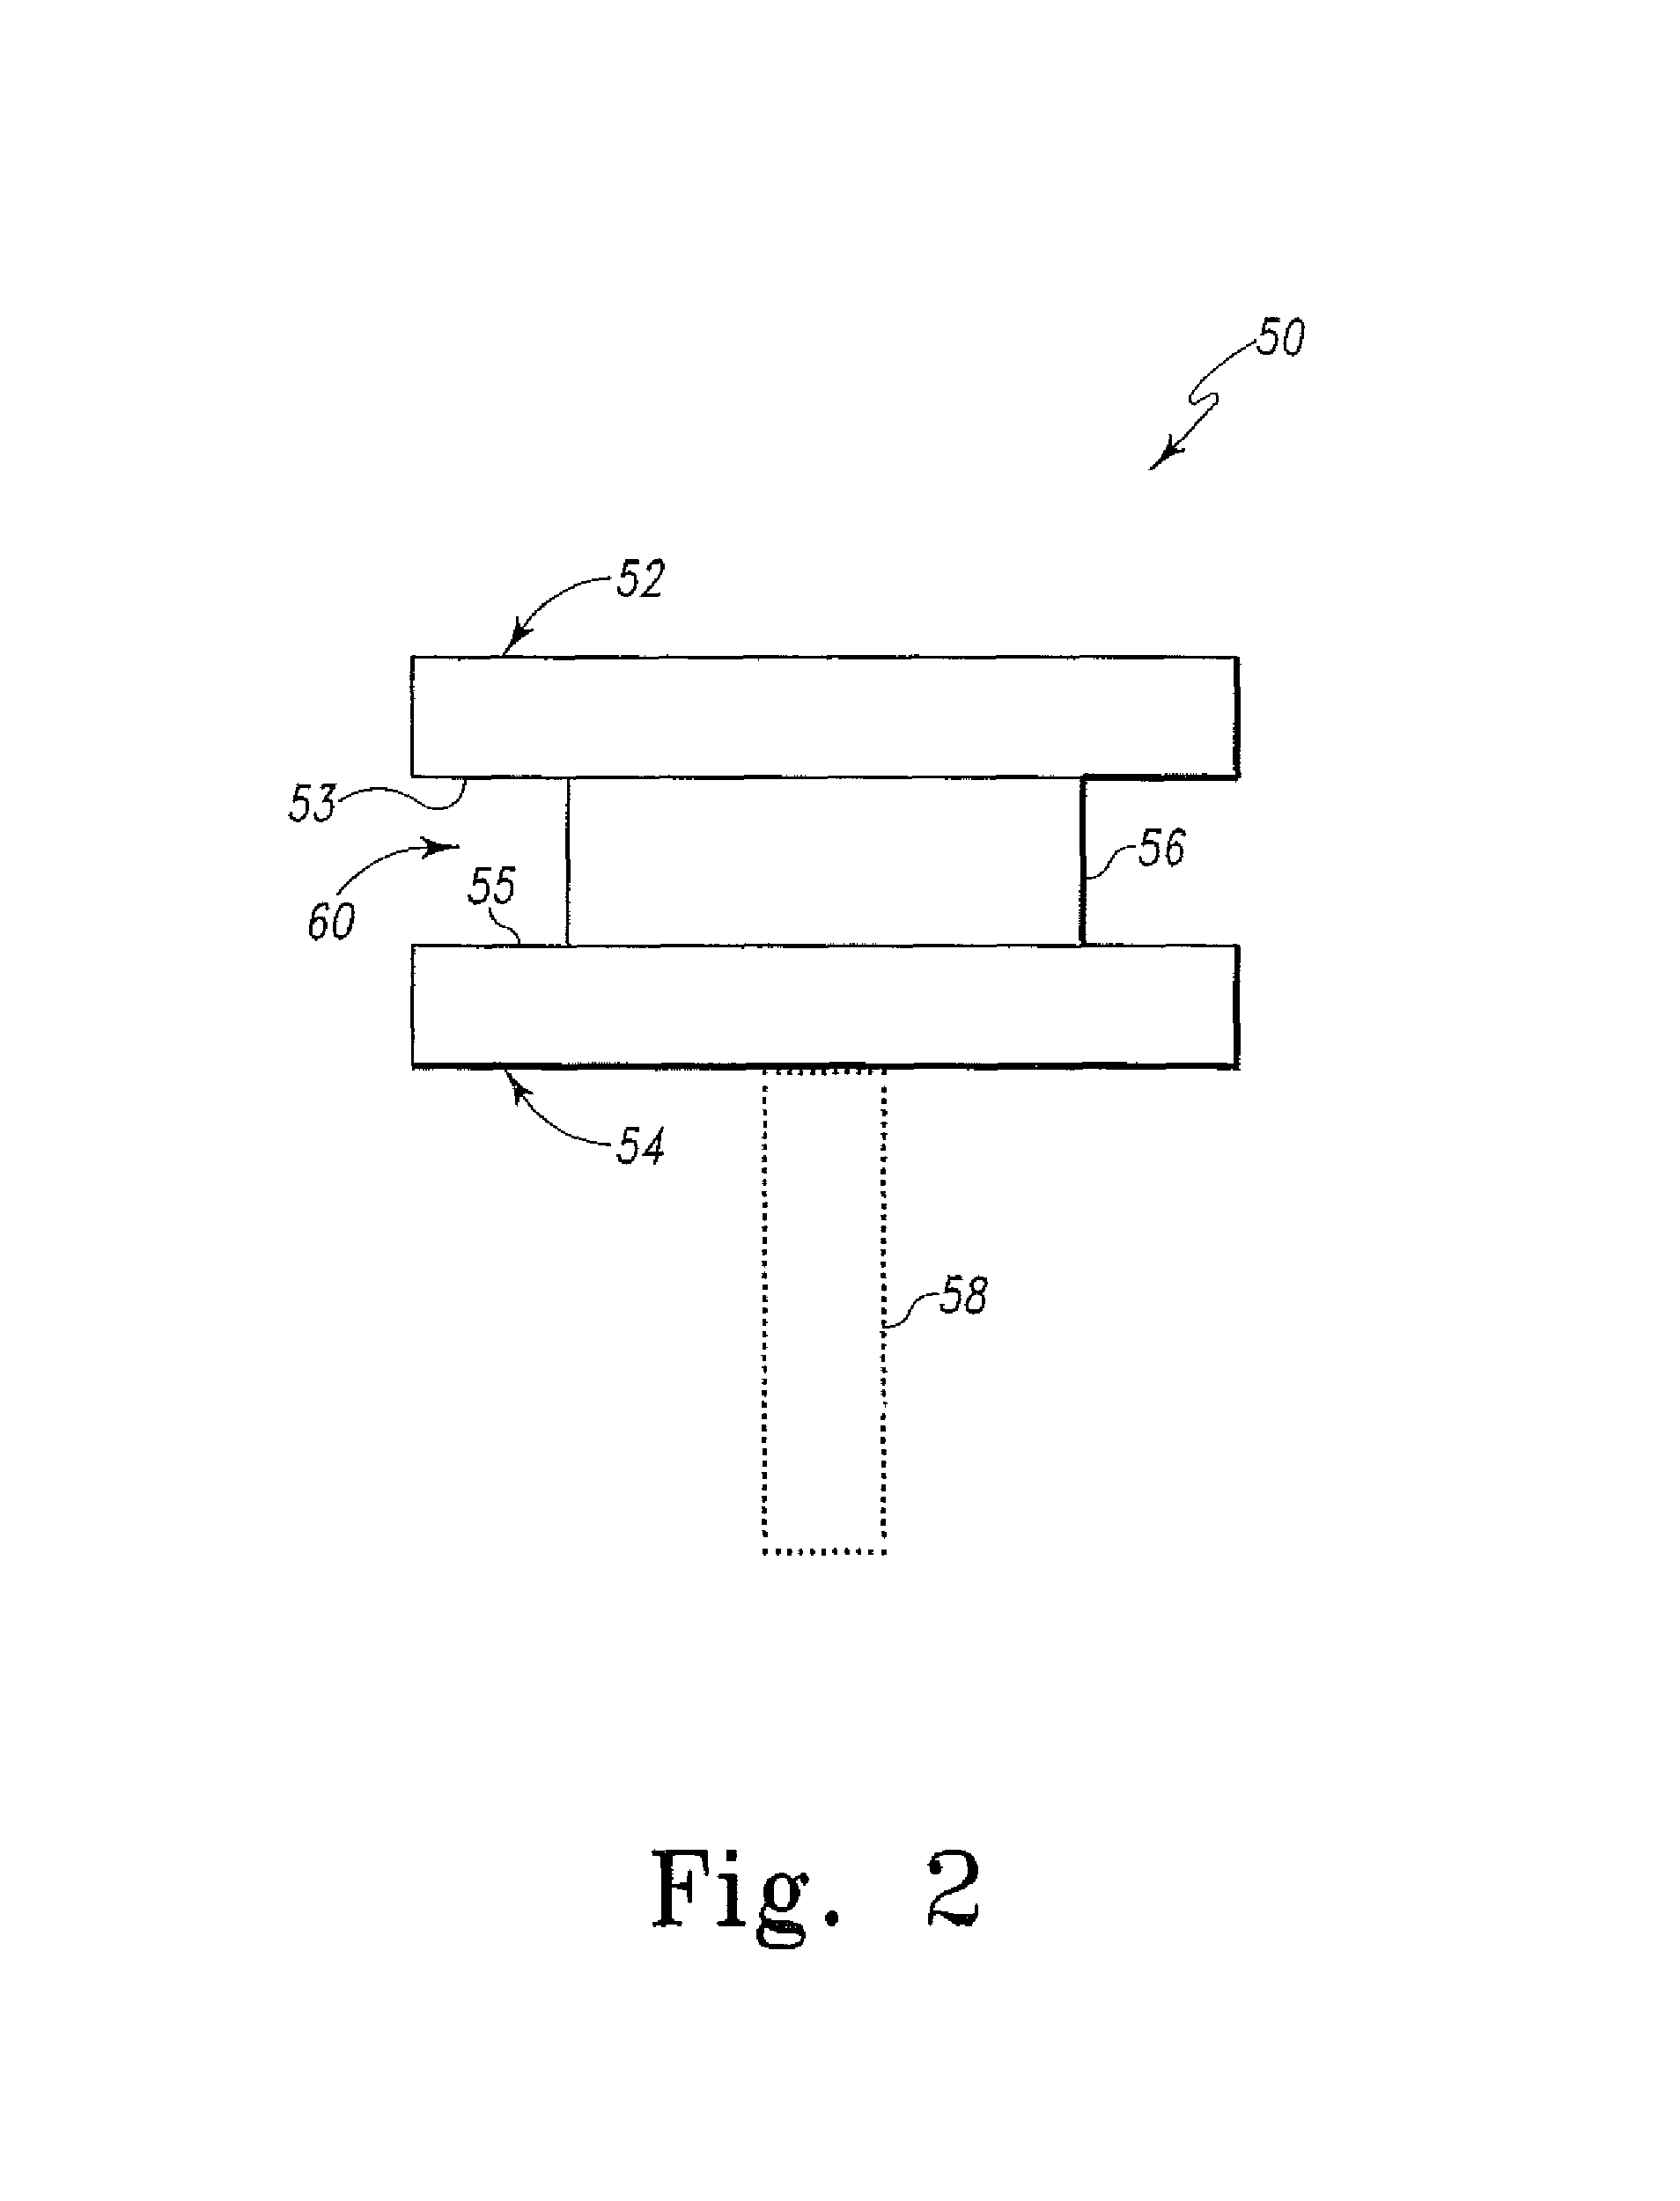 Implant device for cartilage regeneration in load bearing articulation regions